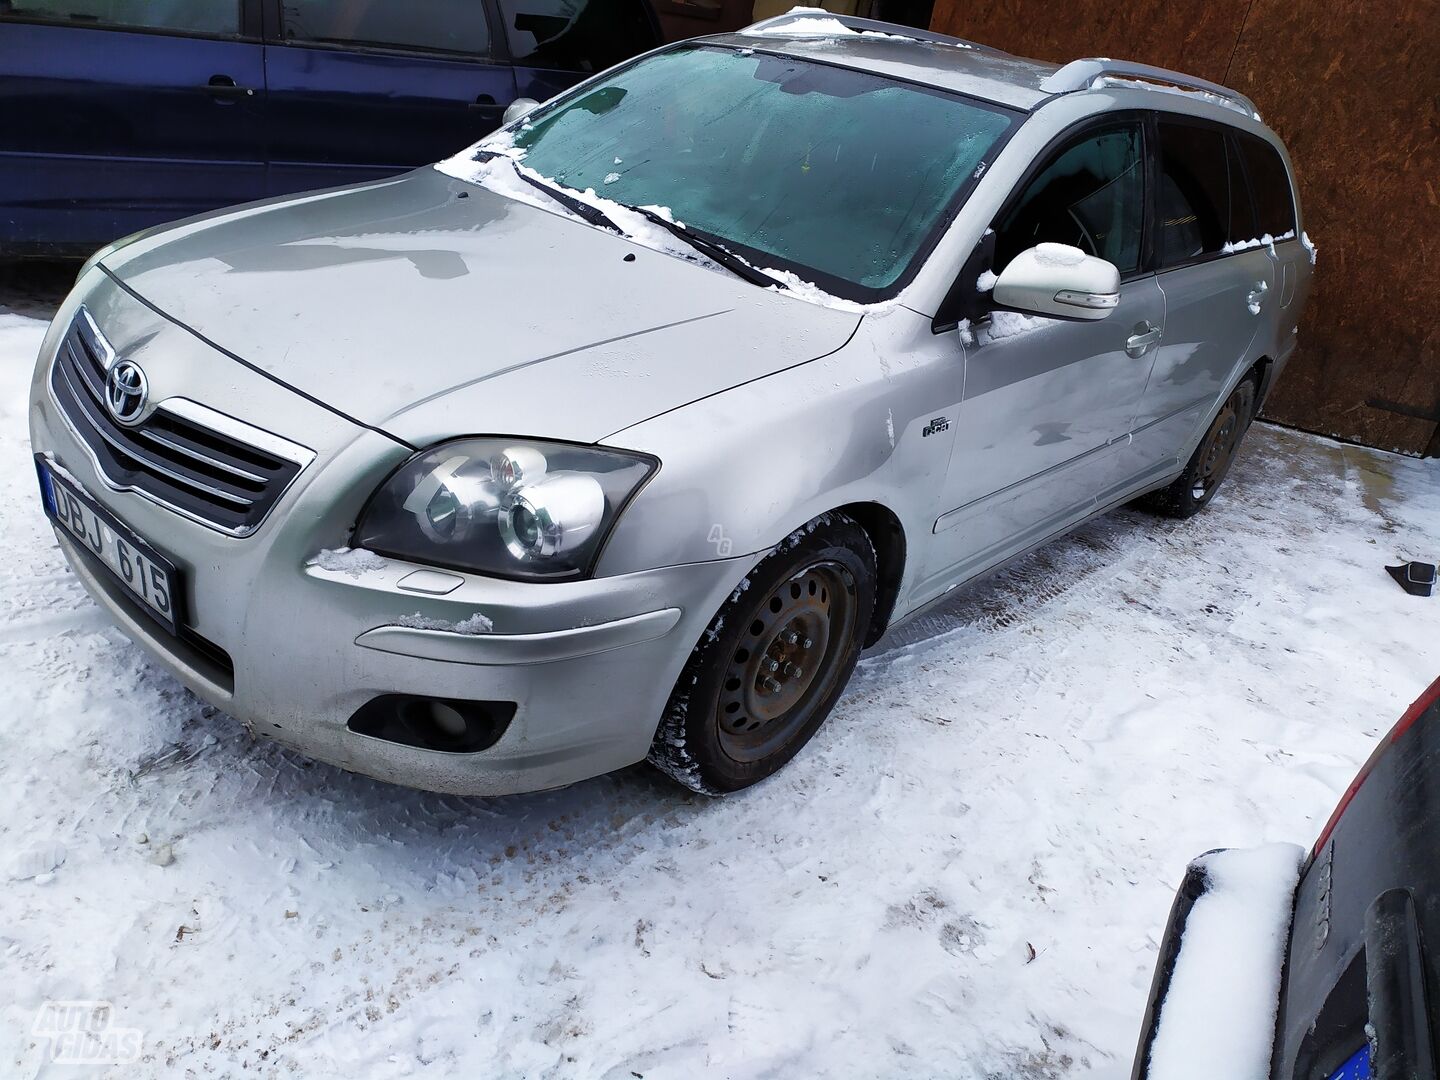 Toyota Avensis II 2008 y parts